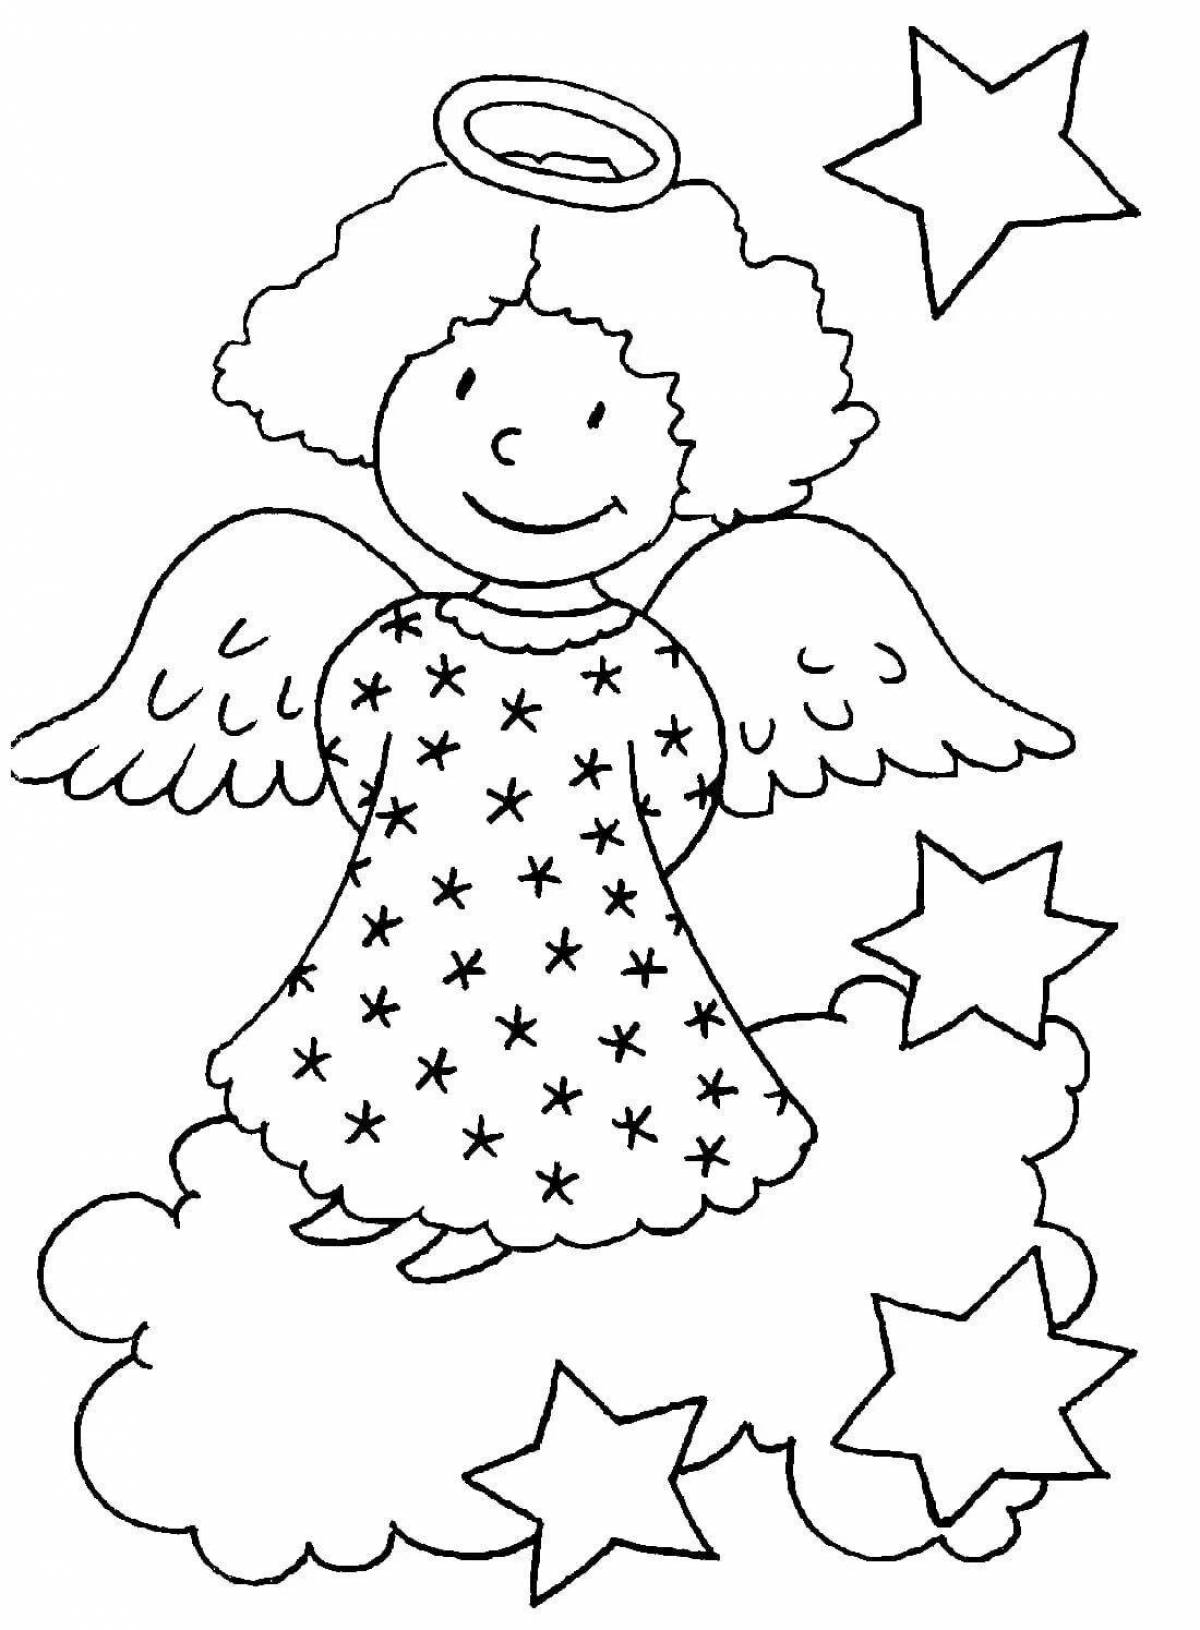 Coloring bright Christmas angels